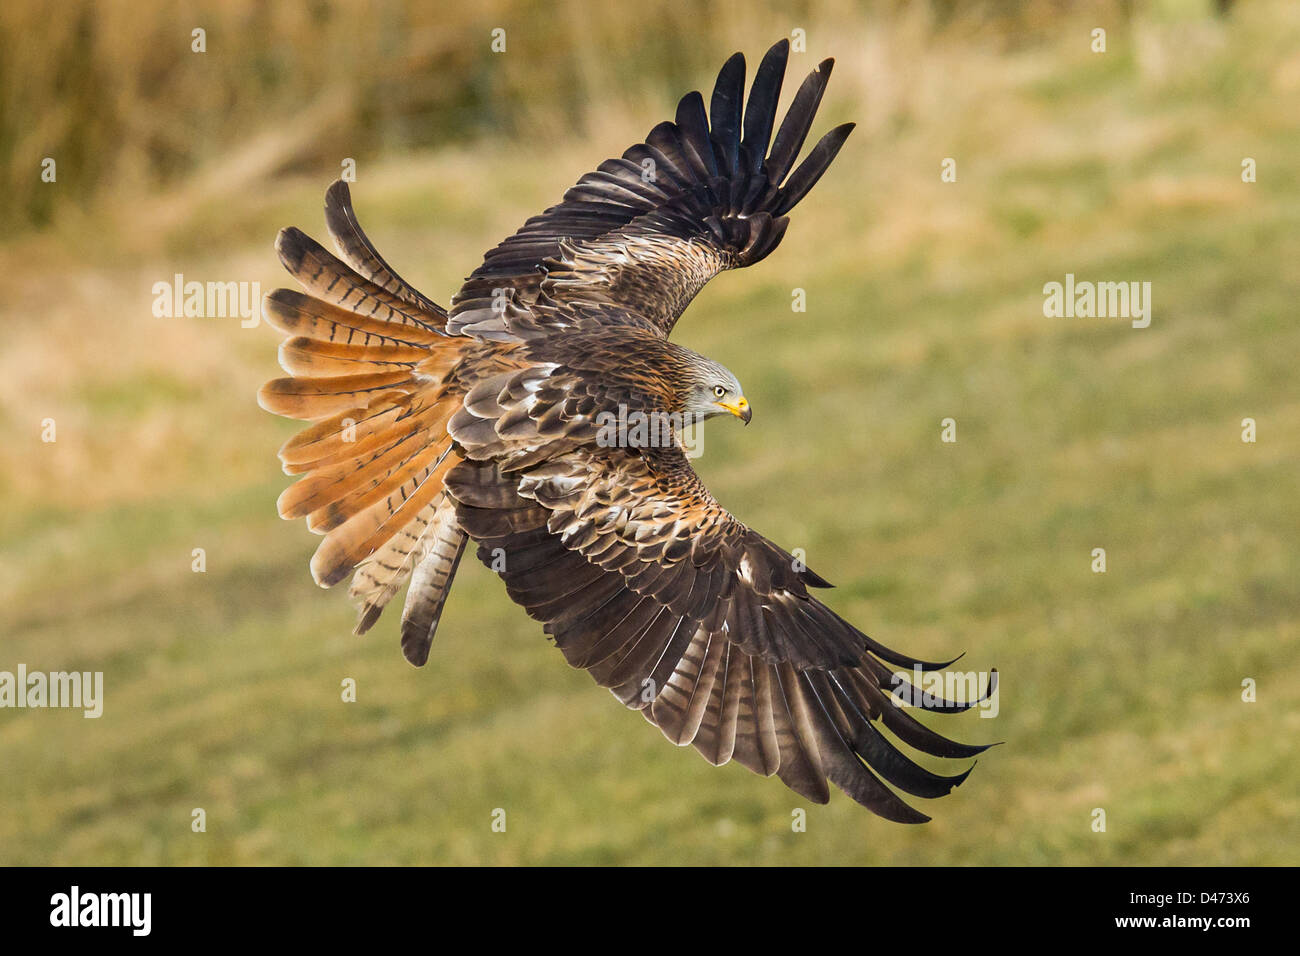 Red Kite (Milvus milvus) frozen in time, showing great detail of feathers extended and plumage colouring, Wales. Stock Photo